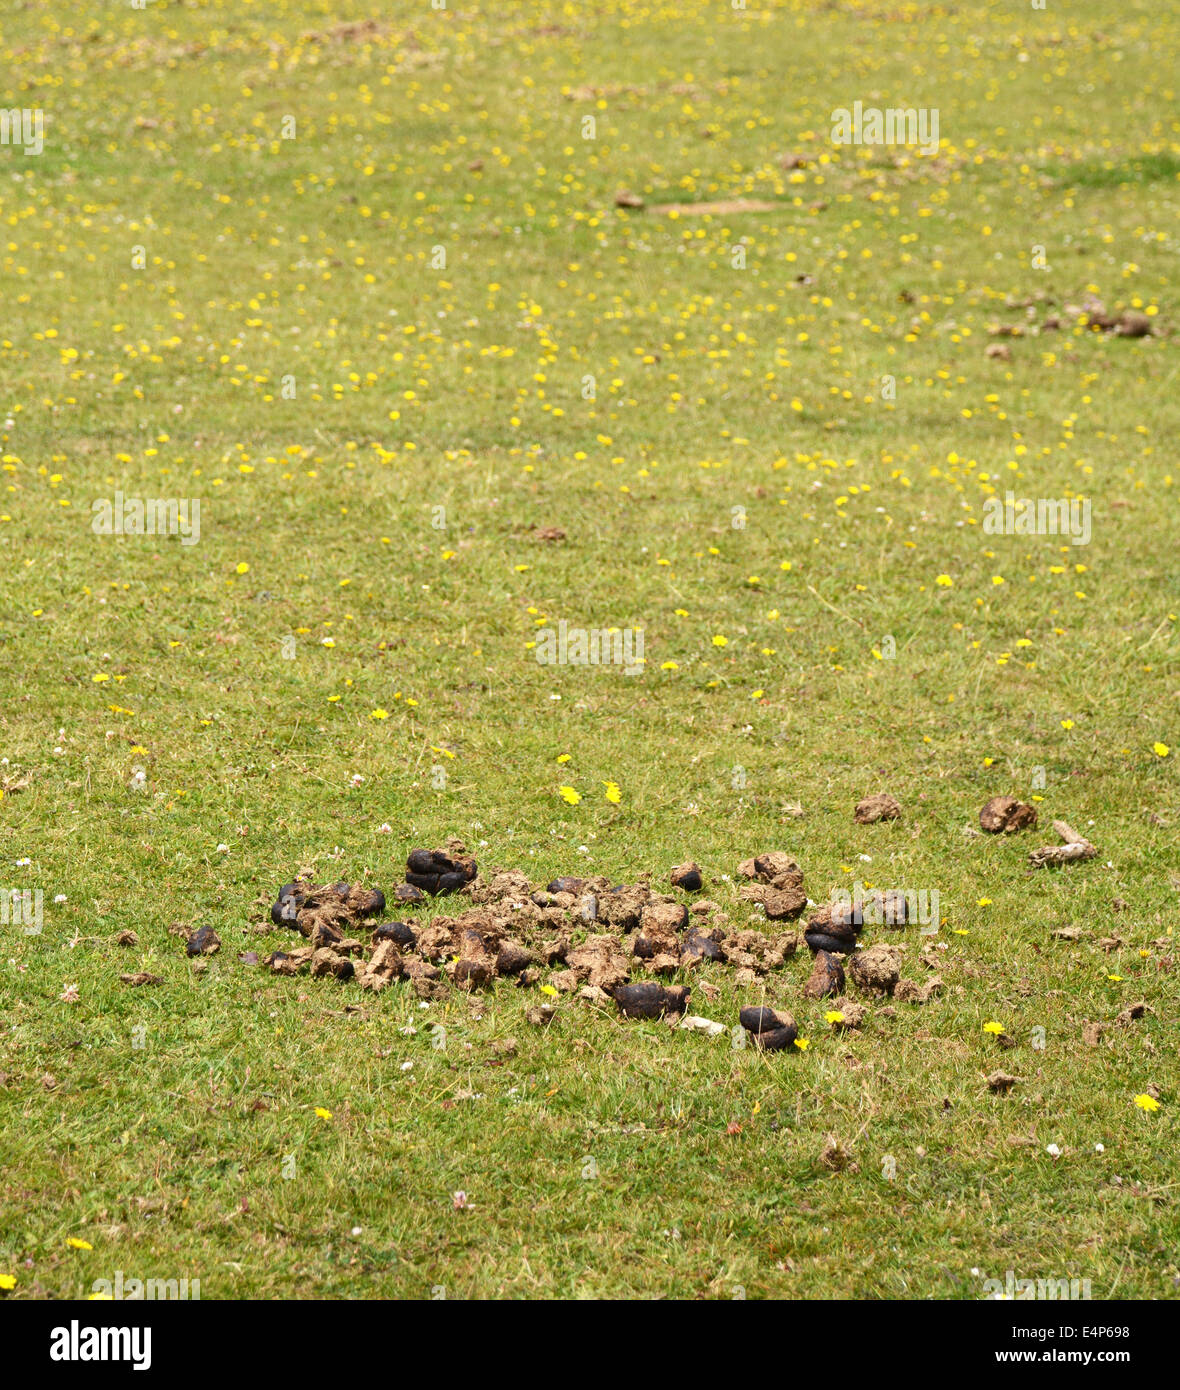 Horse manure in a field of grass and yellow hawkbit flowers, copy space above Stock Photo